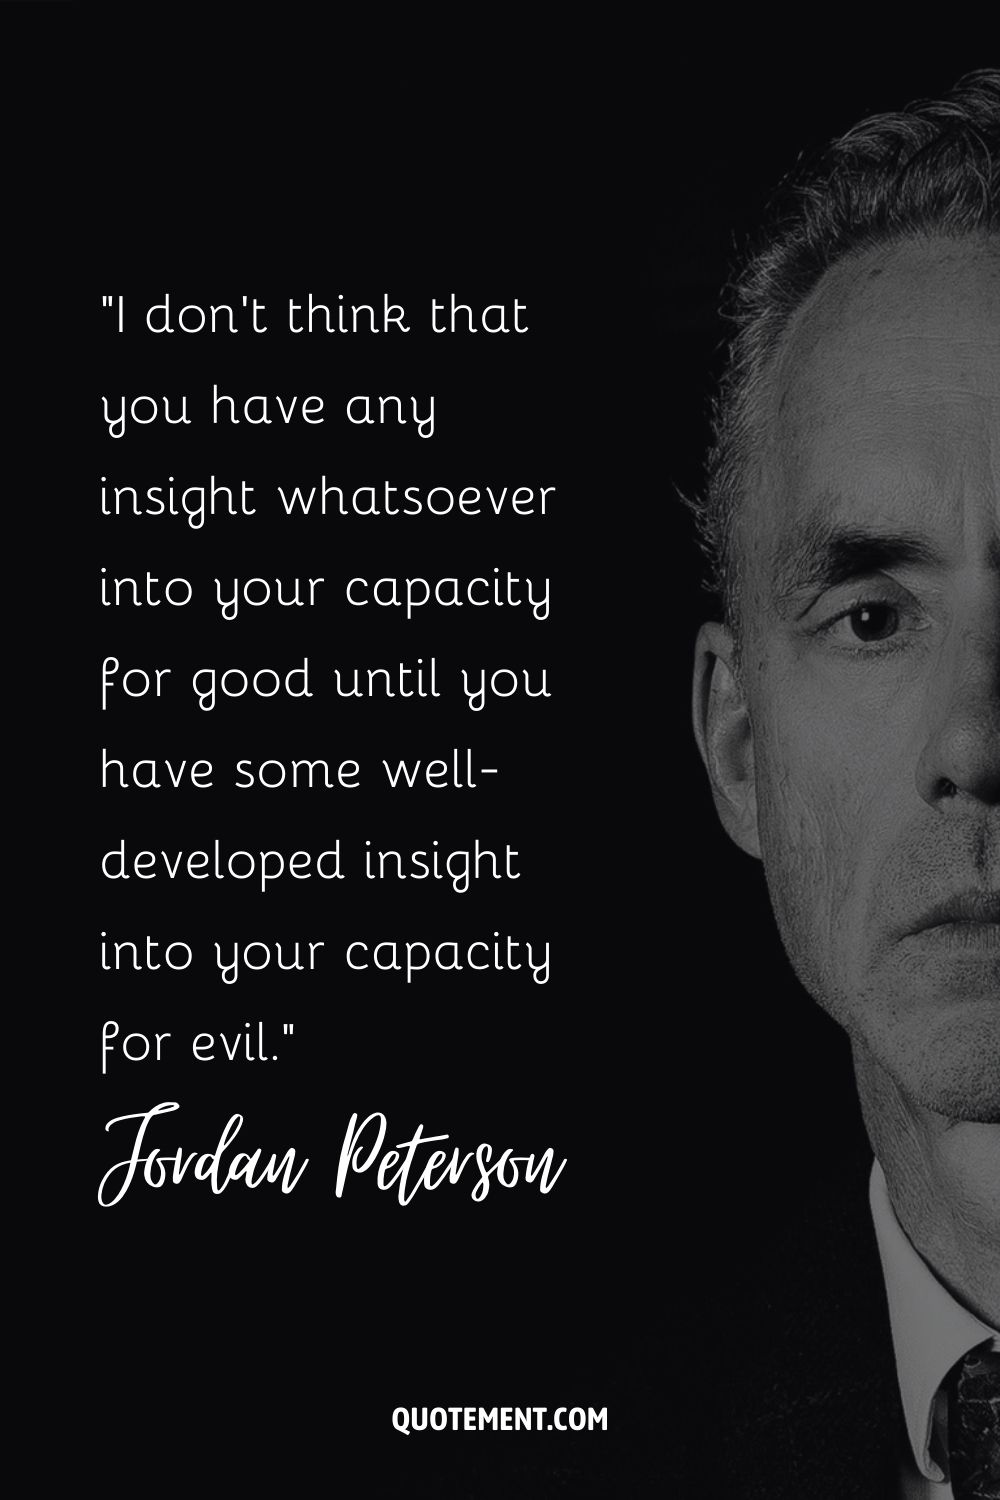 I don't think that you have any insight whatsoever into your capacity for good until you have some well-developed insight into your capacity for evil